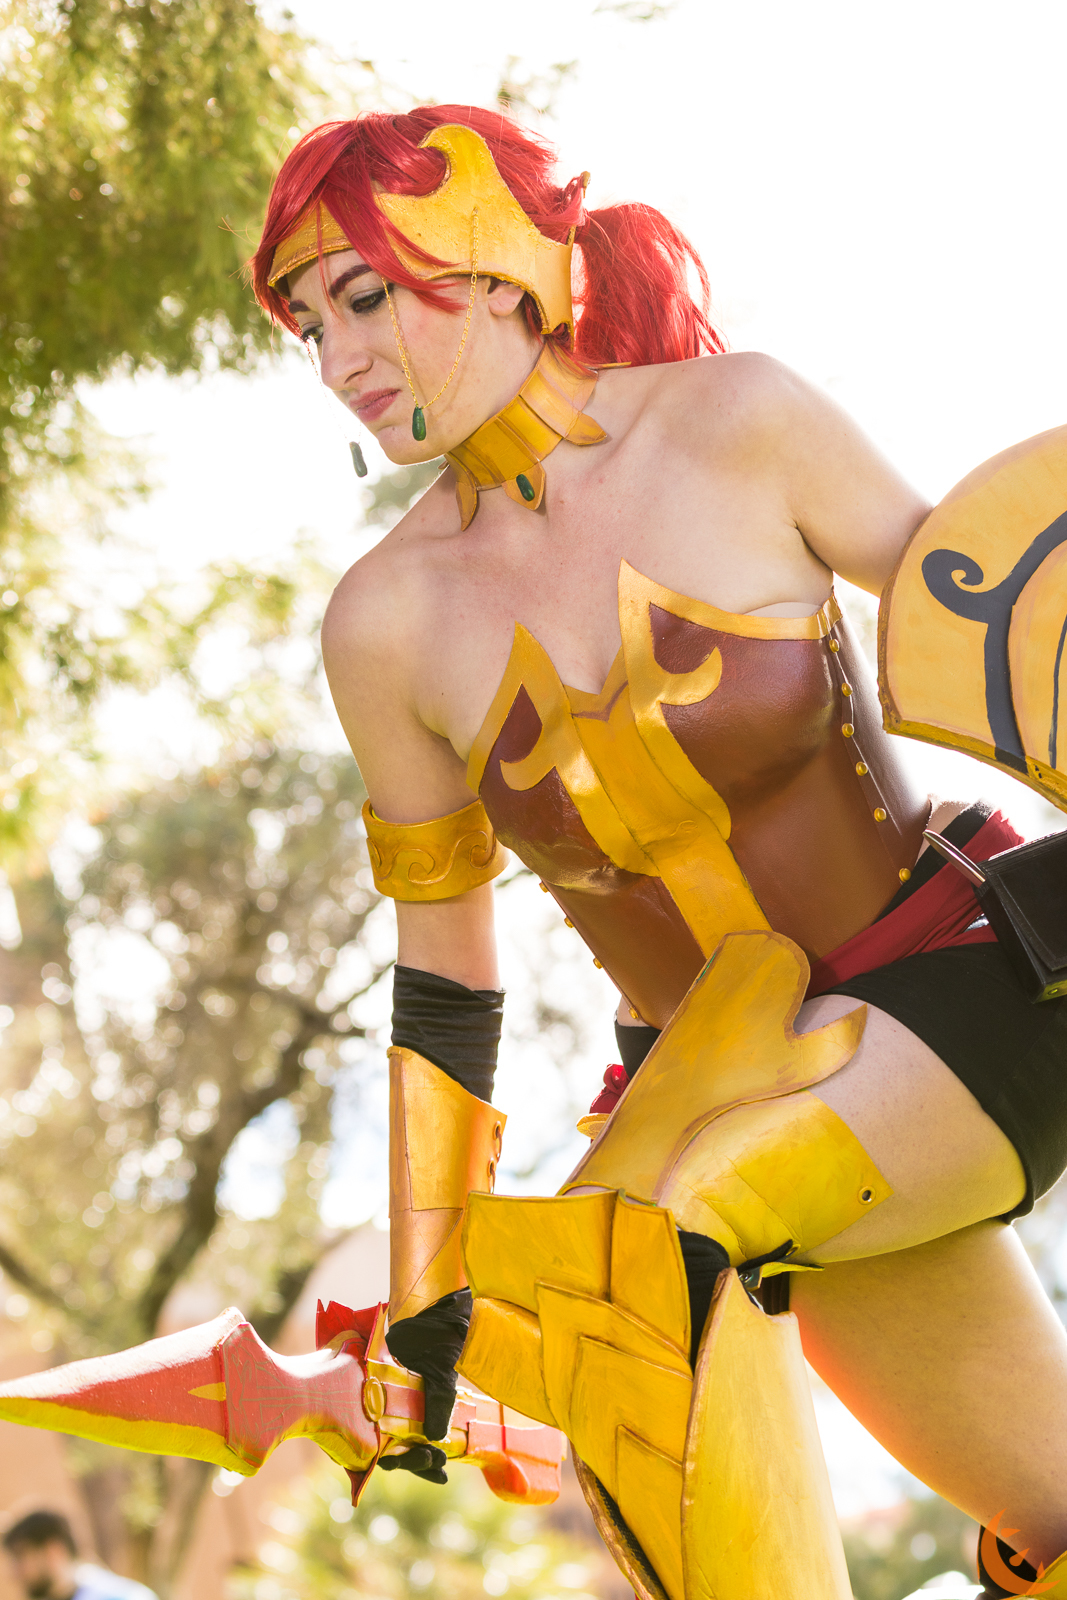 Cospix.net photo featuring ThermoCosplay